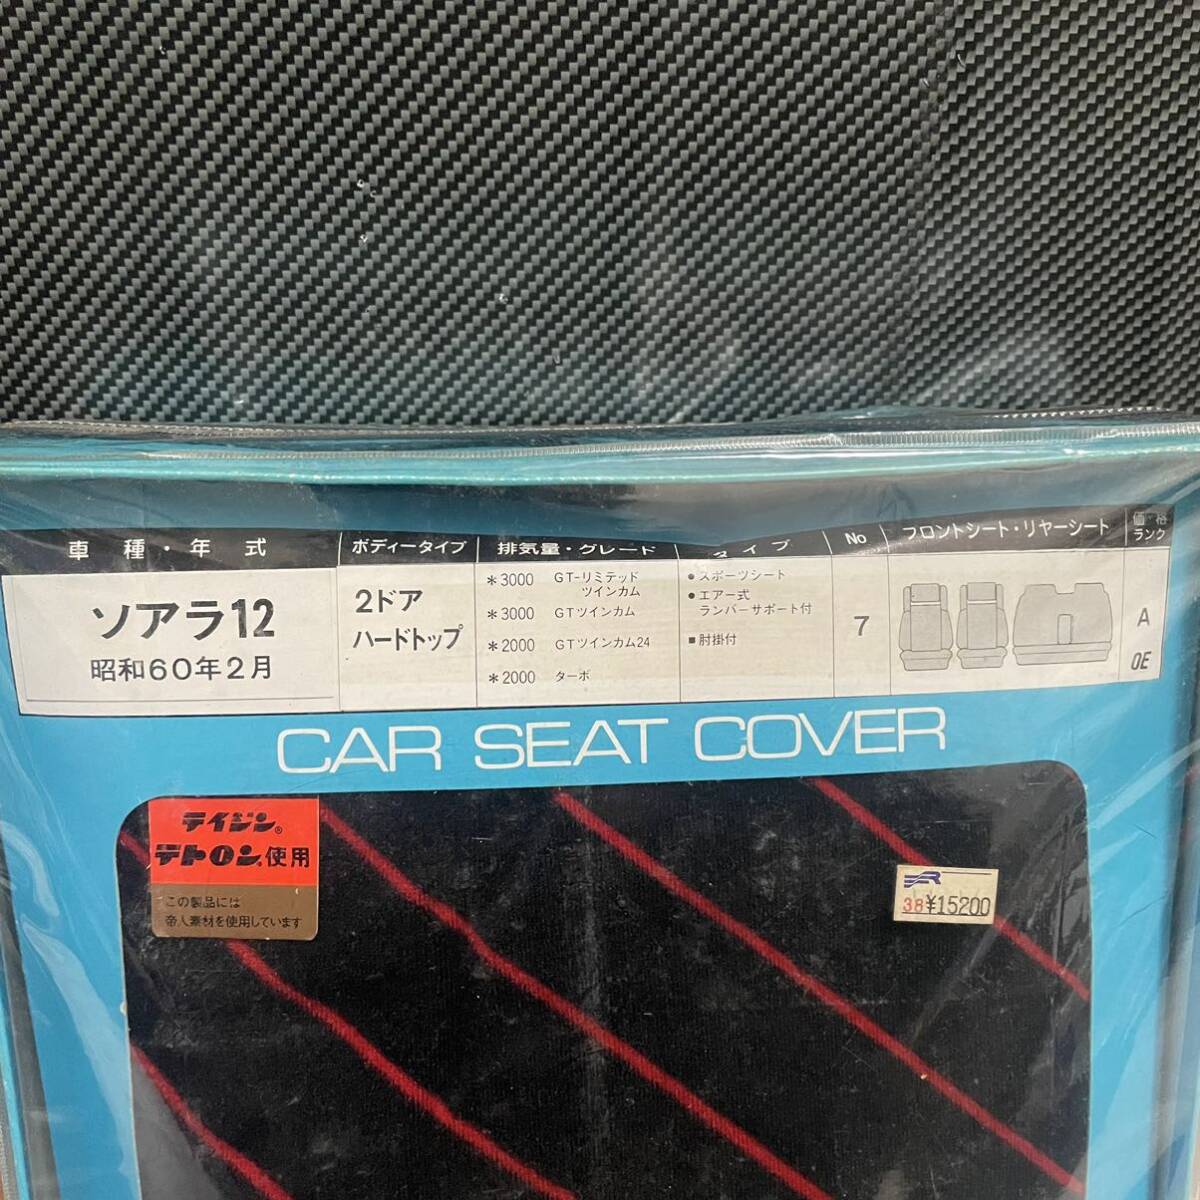 [ rare ][ that time thing ] Soarer 12 CAR SEAT COVER seat cover Showa era 60 year approximately 40 year front Order Echo